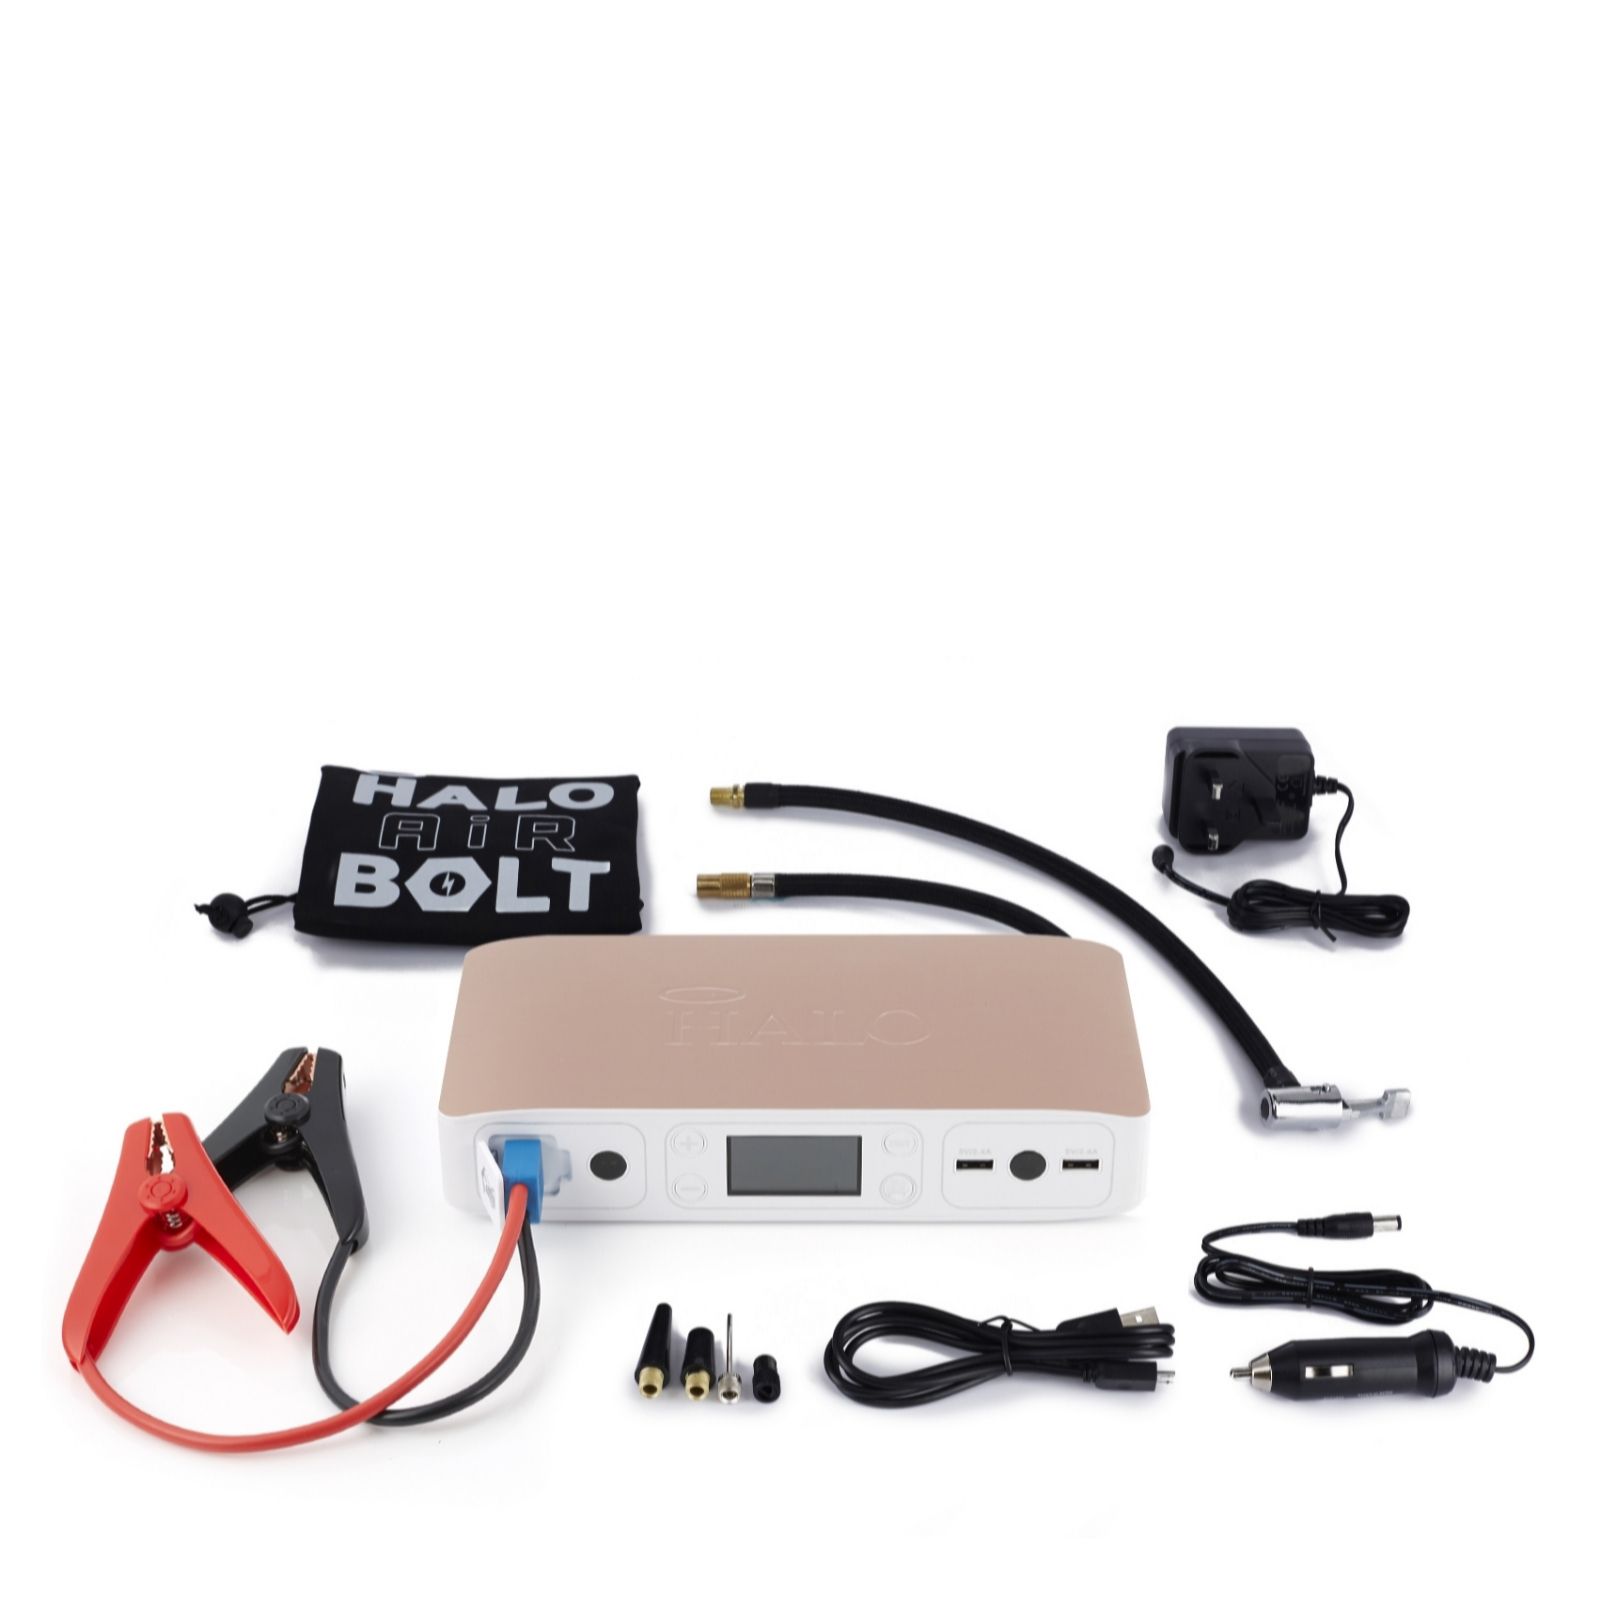 Halo Bolt Air 58830 Portable Charger with Car Jump Starter & Tyre Pump - QVC UK